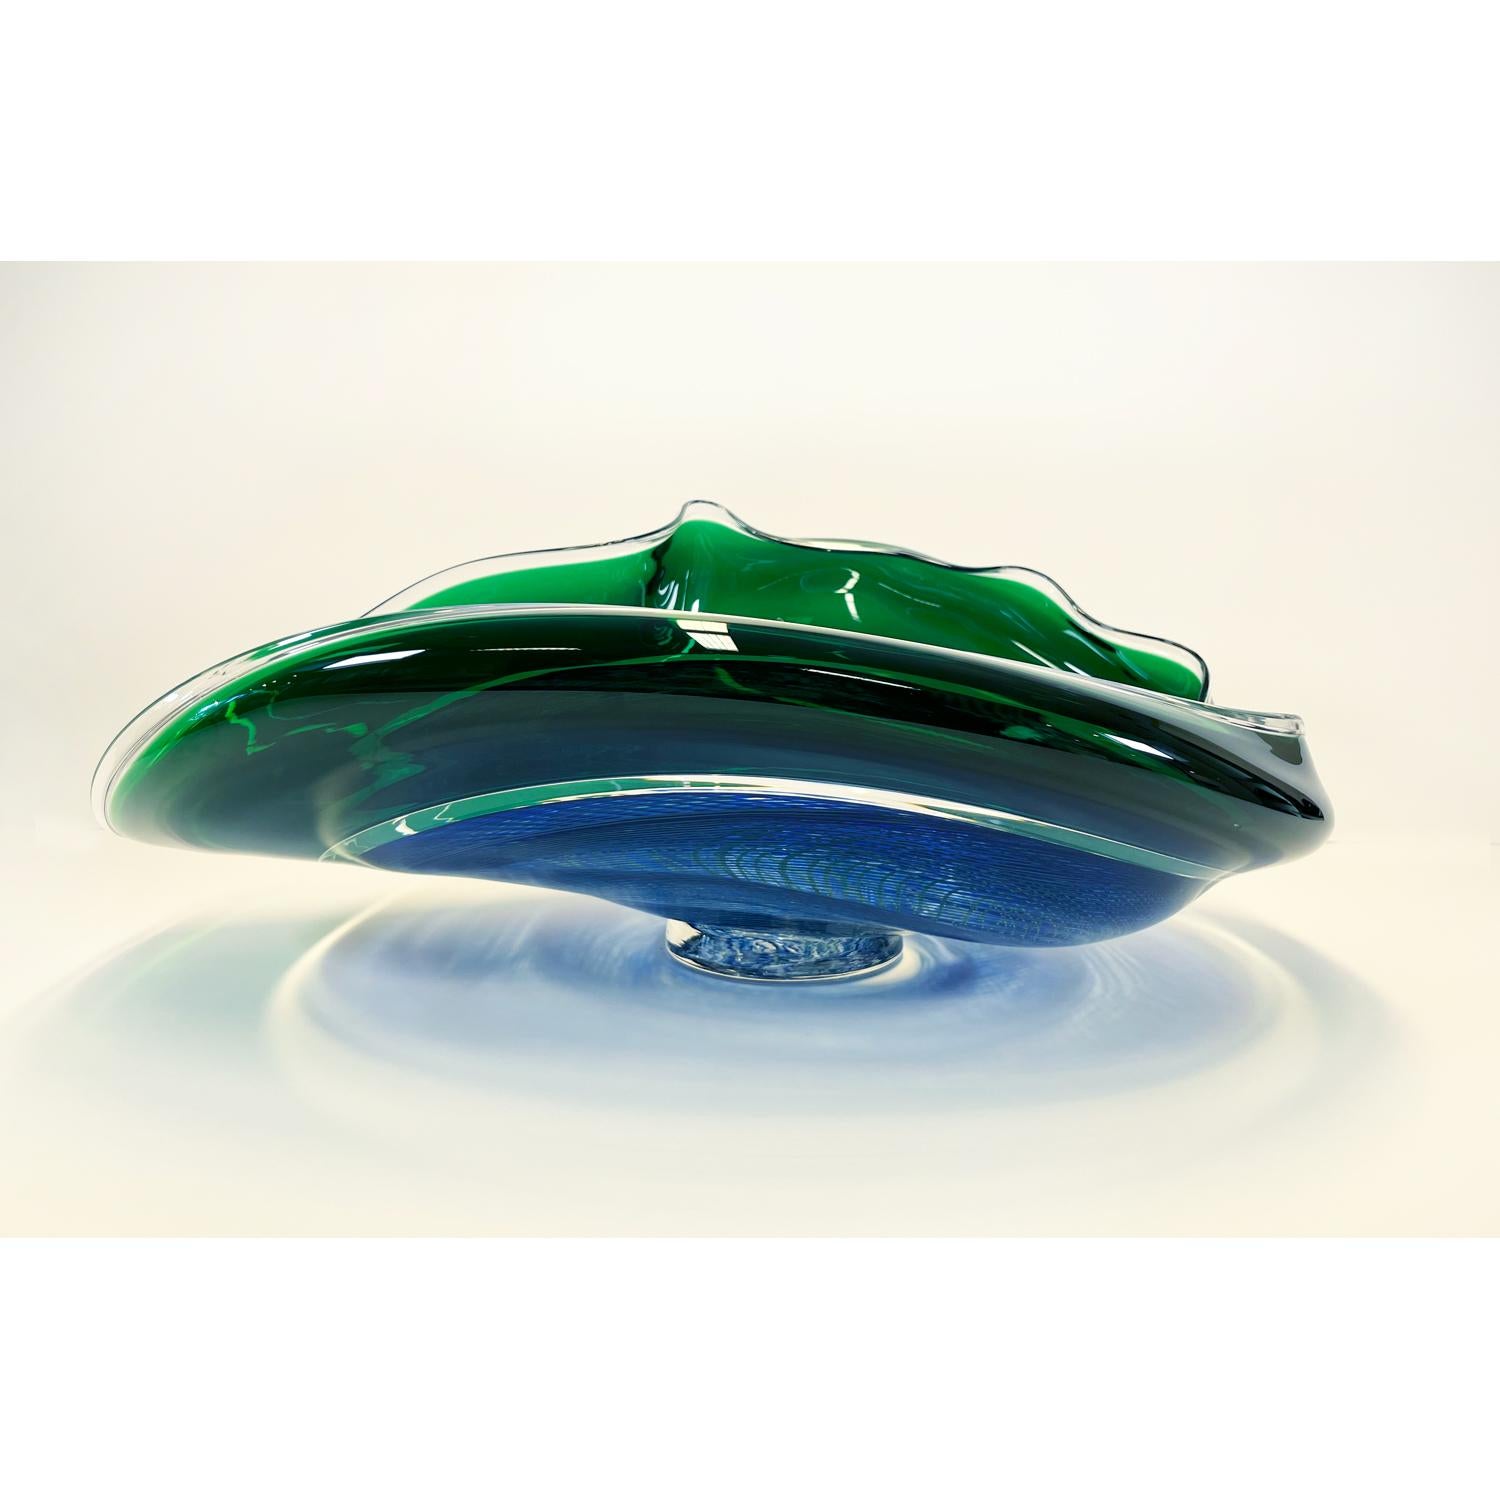 This Blue/Emerald Rondelle Bowl is a continuation of David's work with cane. Fusing his signature wave bowl motif with his newer rondelle cane pattern. This beautiful glass bowl is sure to be a showstopper in your space. 

David Thai is a Chinese